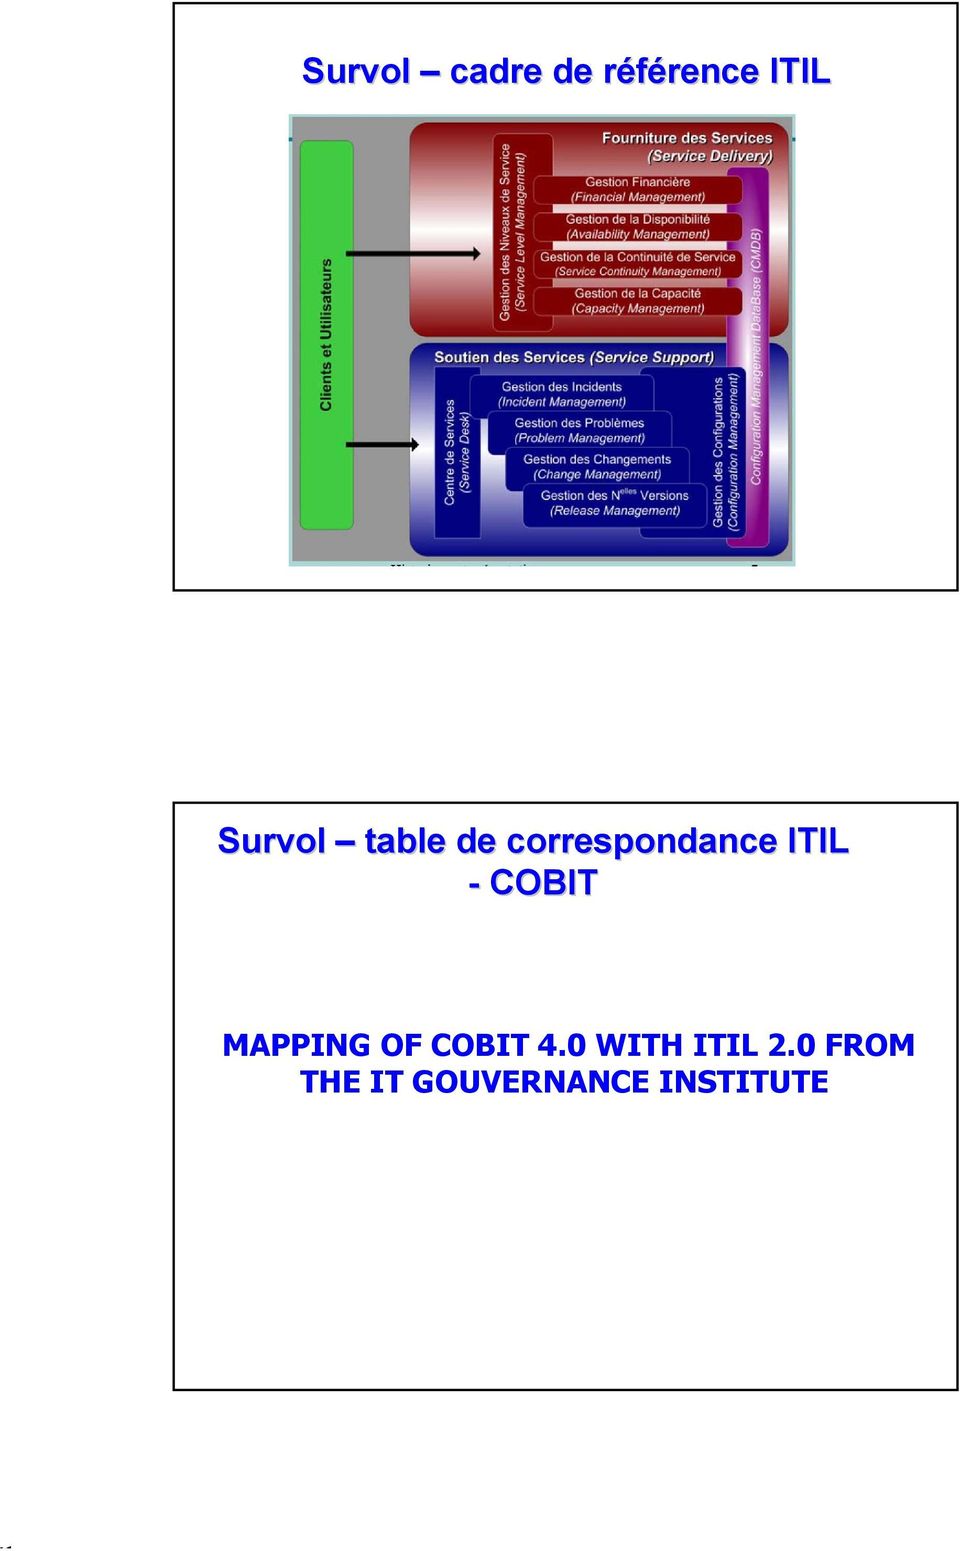 ITIL - COBIT MAPPING OF COBIT 4.